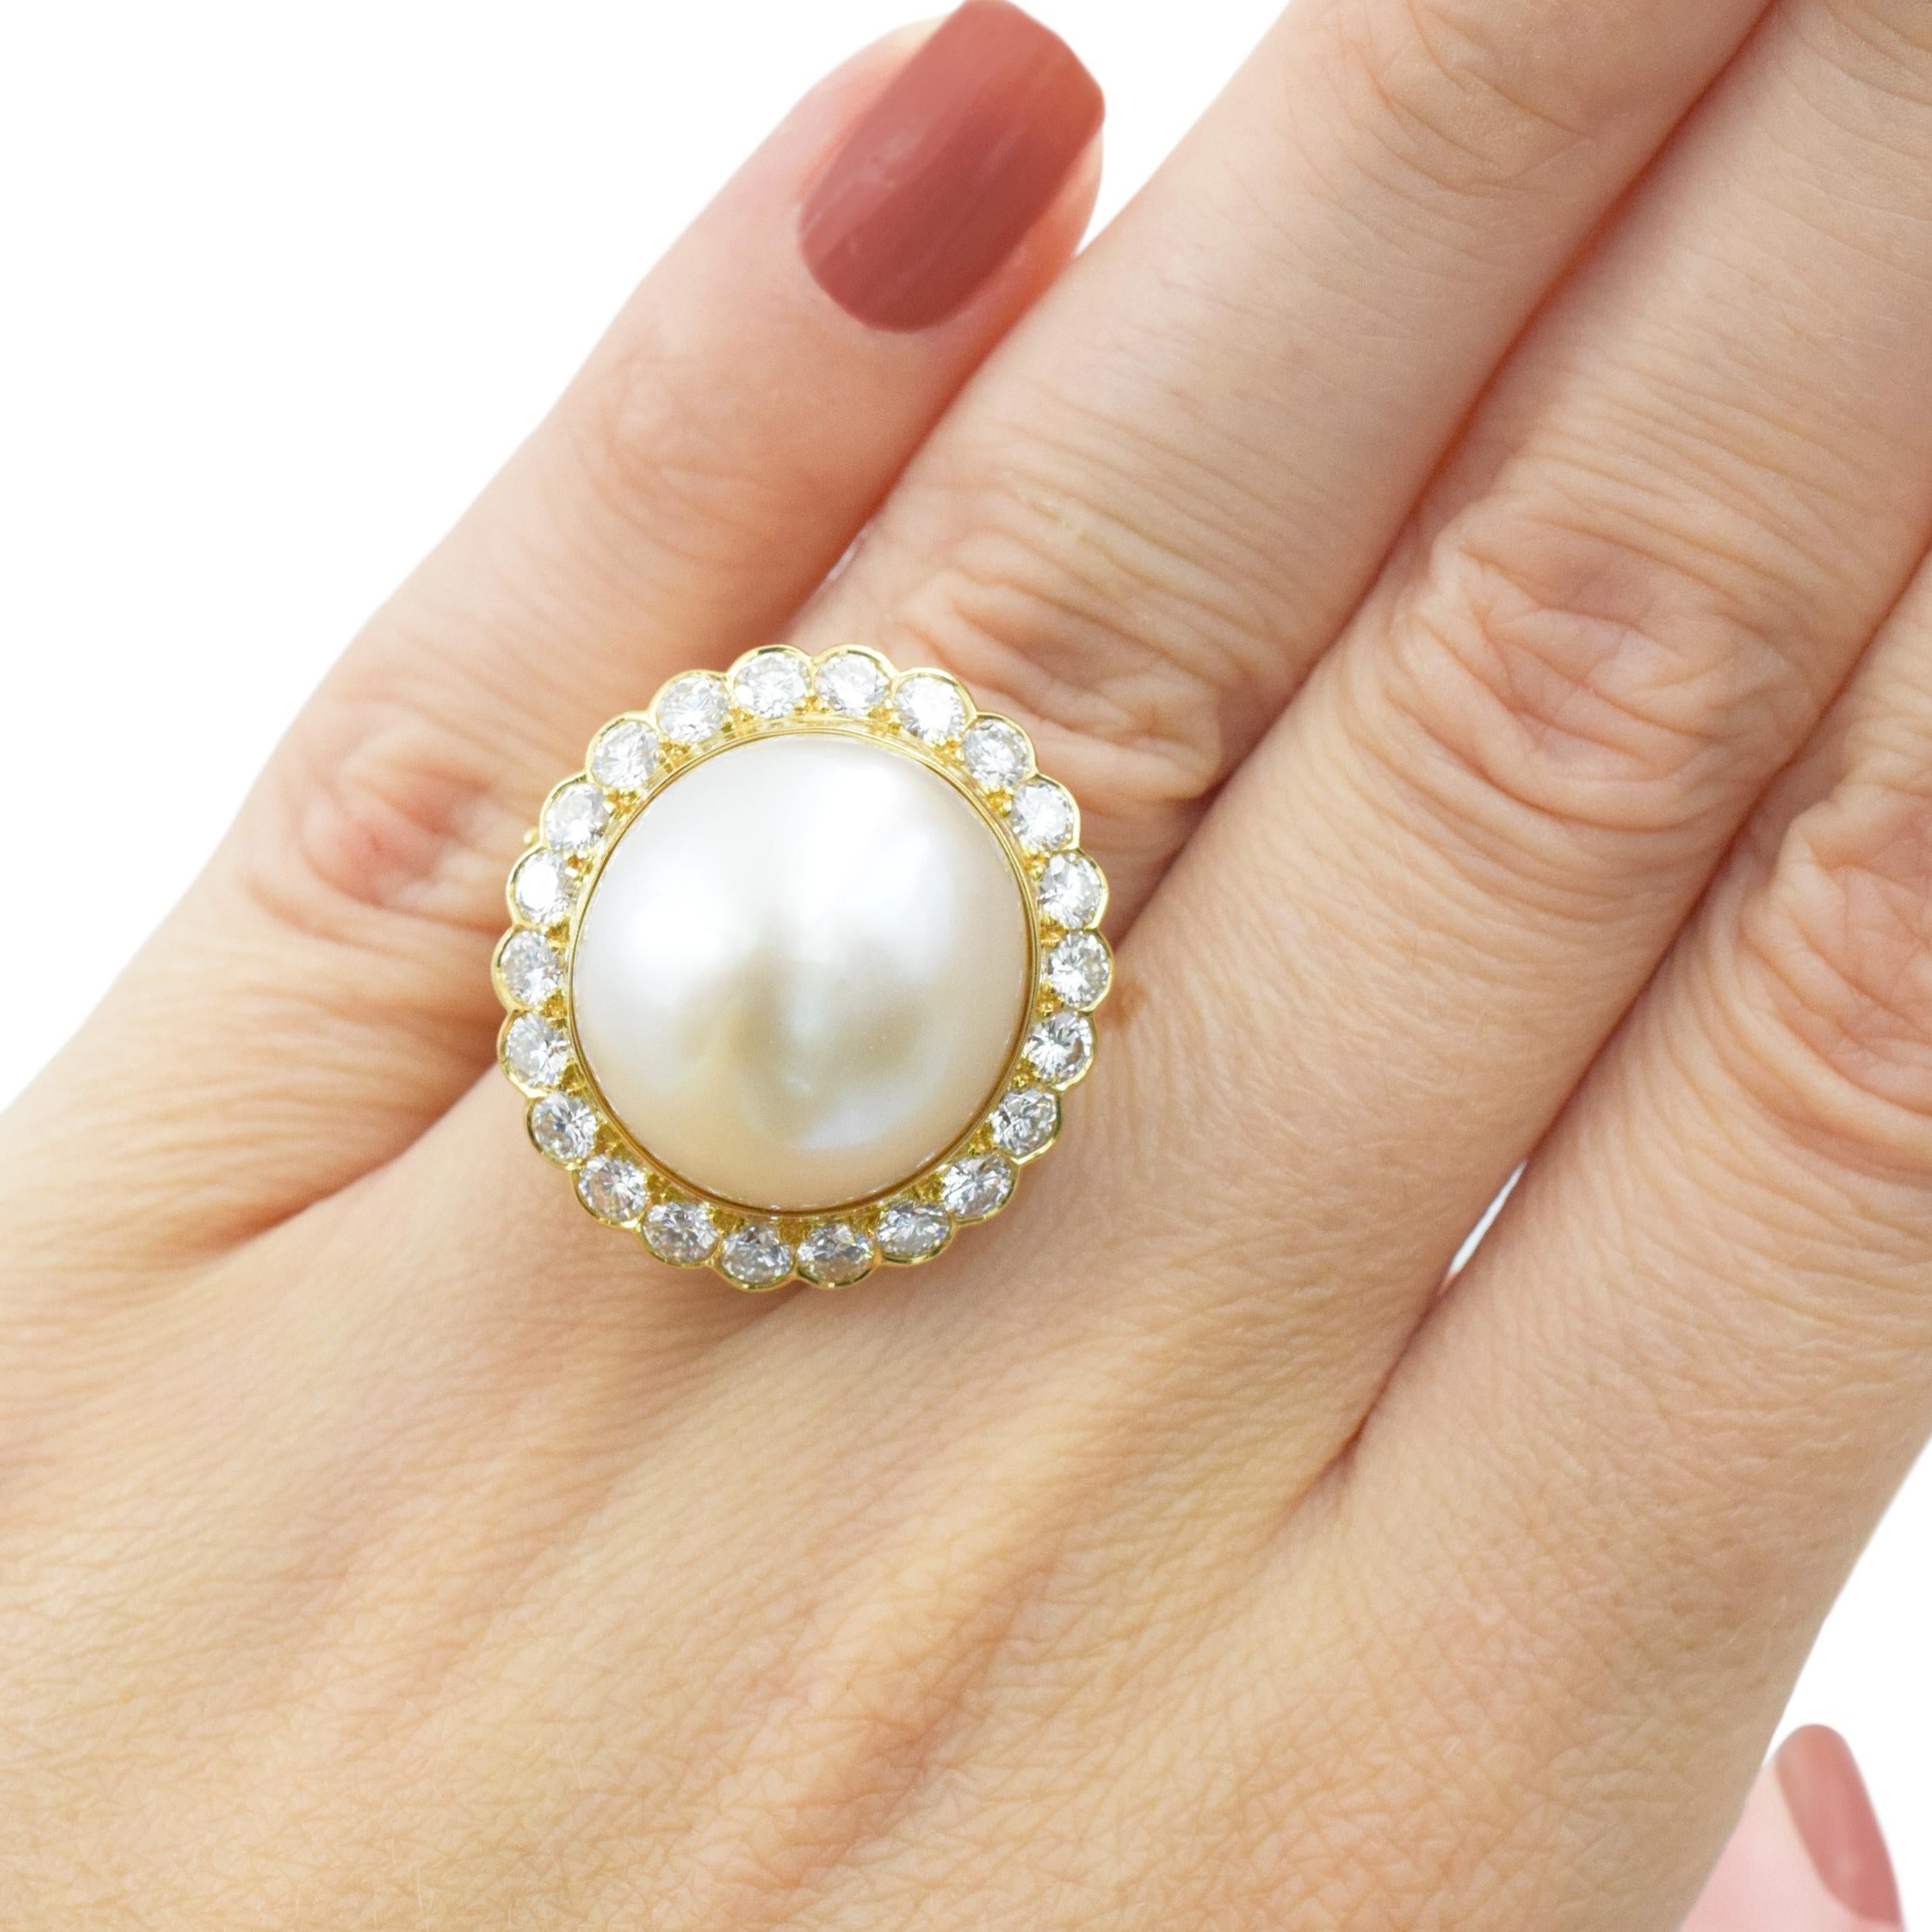 Van Cleef & Arpels Pearl And Diamond Ring, Crafted In 18k Yellow Gold. The center of this statement ring features oval shaped cultured pearl set in the center, measuring approximately 17.4 X 14.5mm. The pearl has a creamy white color with soft rose